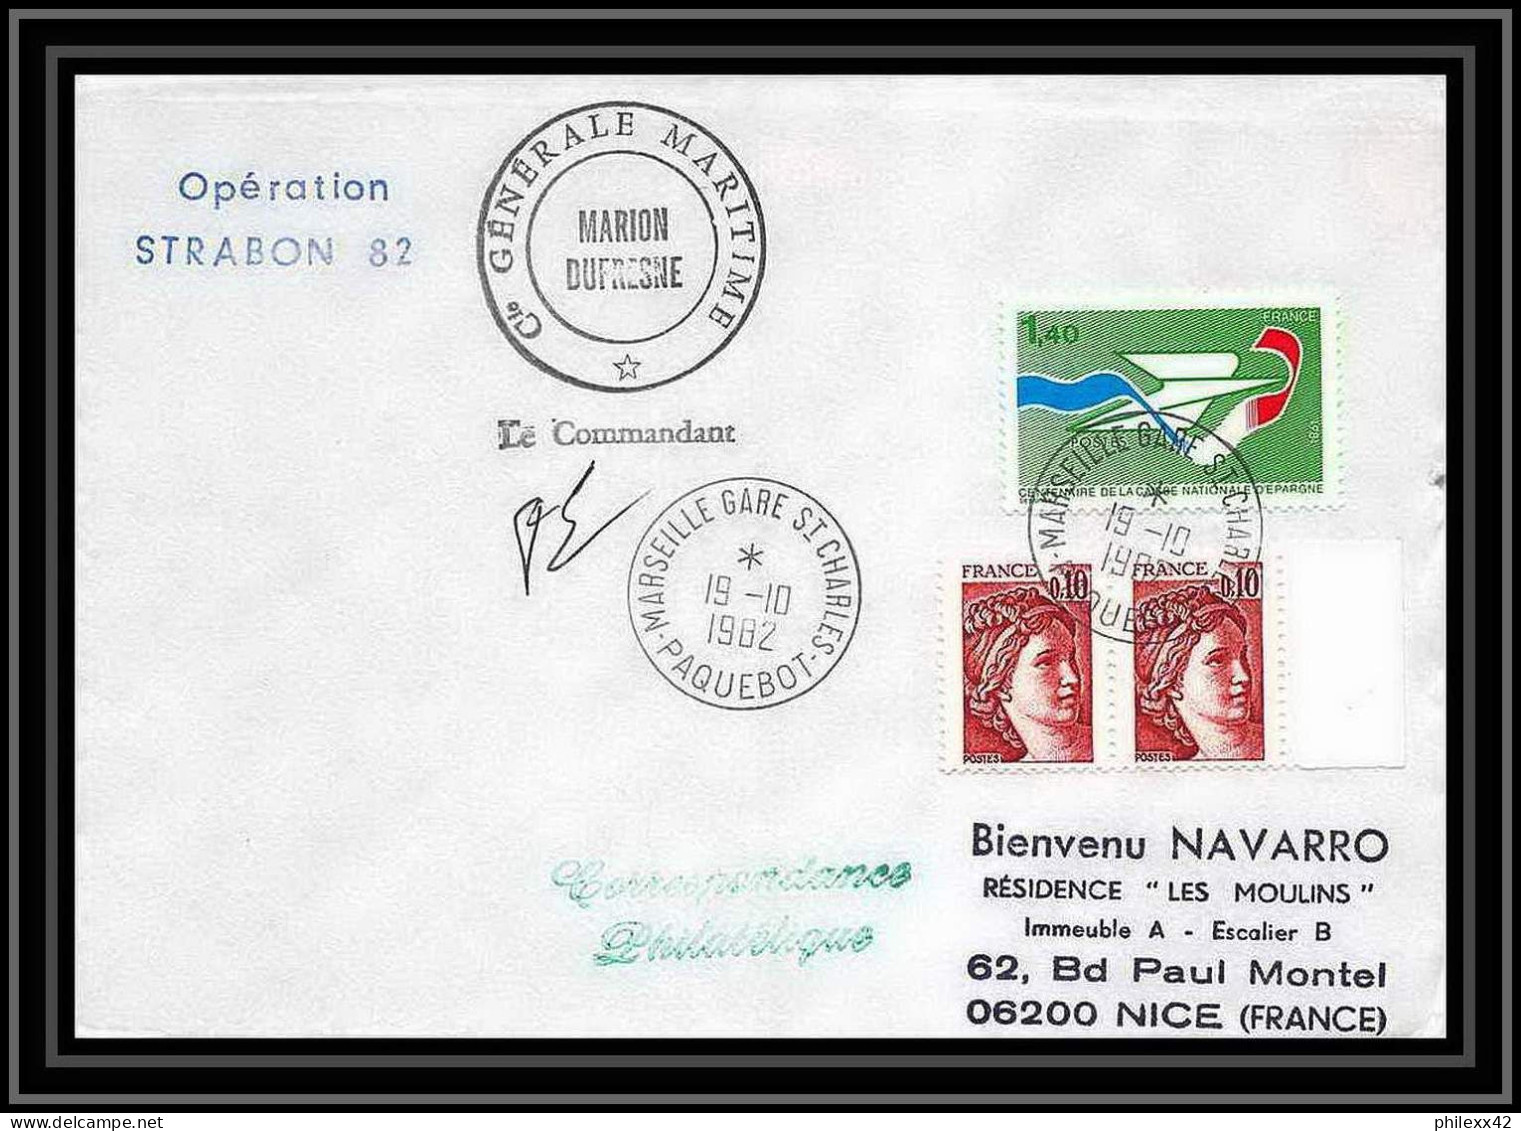 1355 Opération Strabon 82 Marion Dufresne Signé Signed 19/10/1982 TAAF Antarctic Terres Australes Lettre (cover) - Antarctic Expeditions